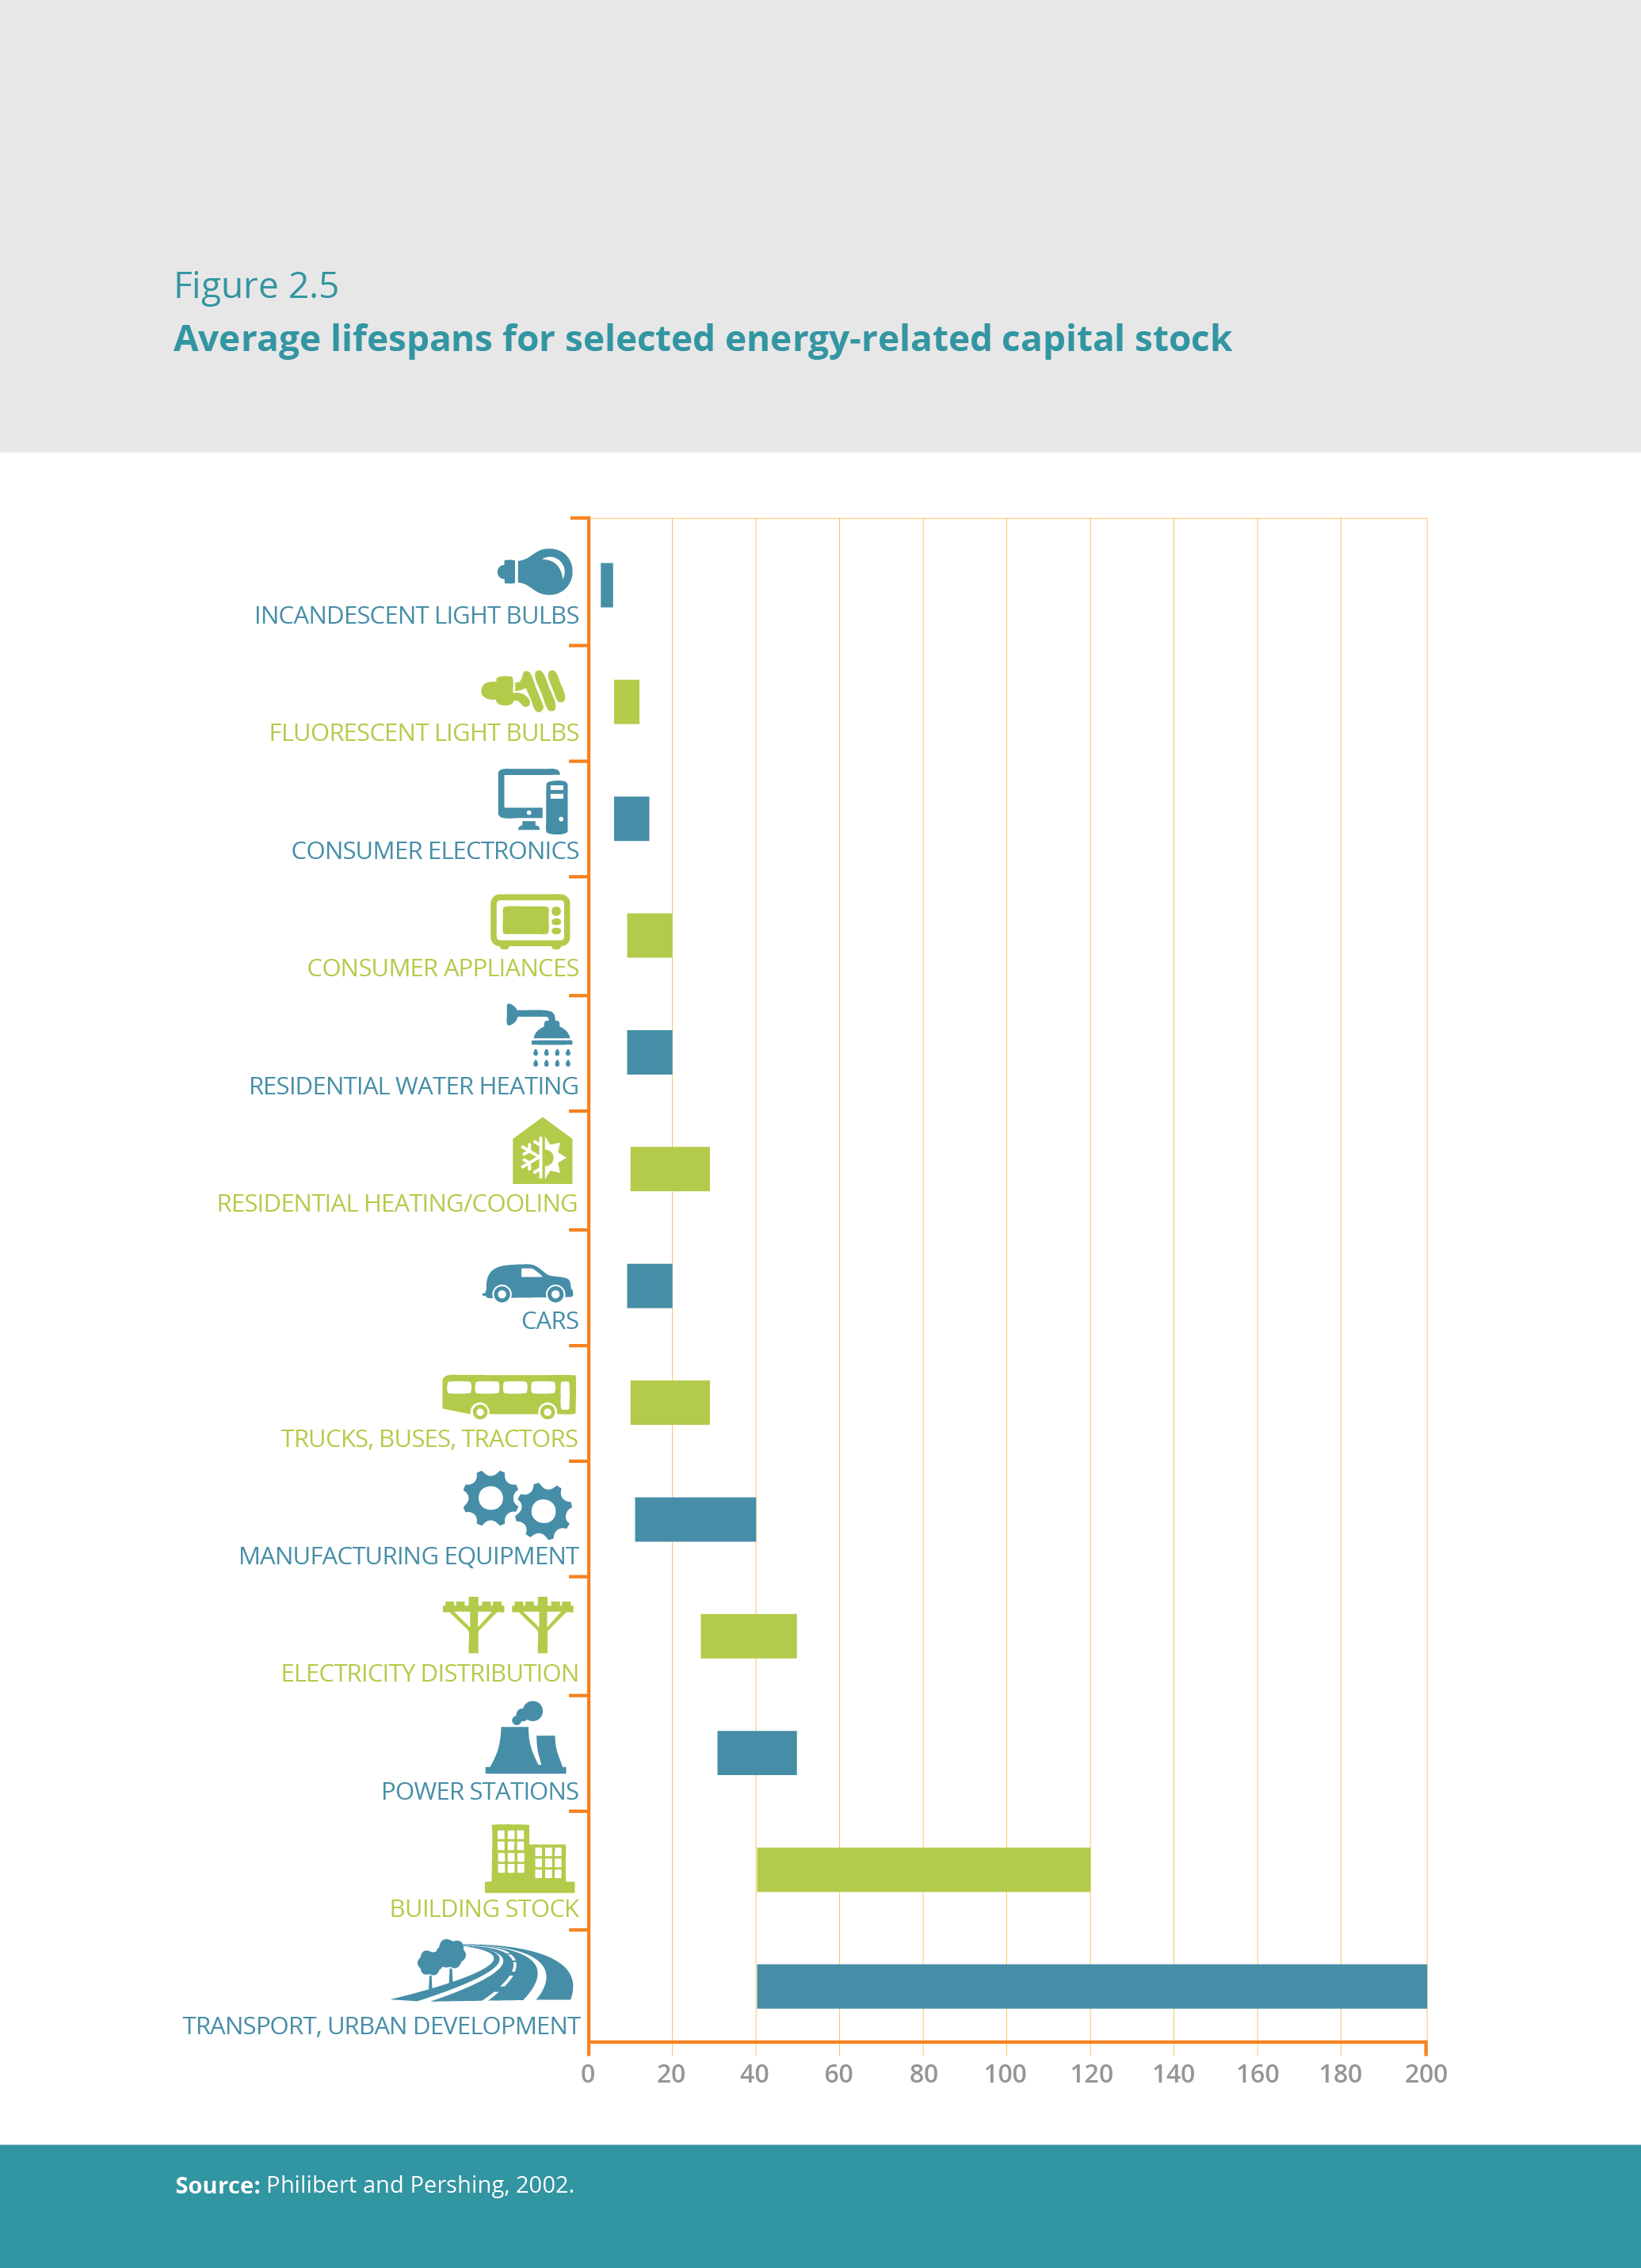 Average lifespans for selected energy-related capital stock